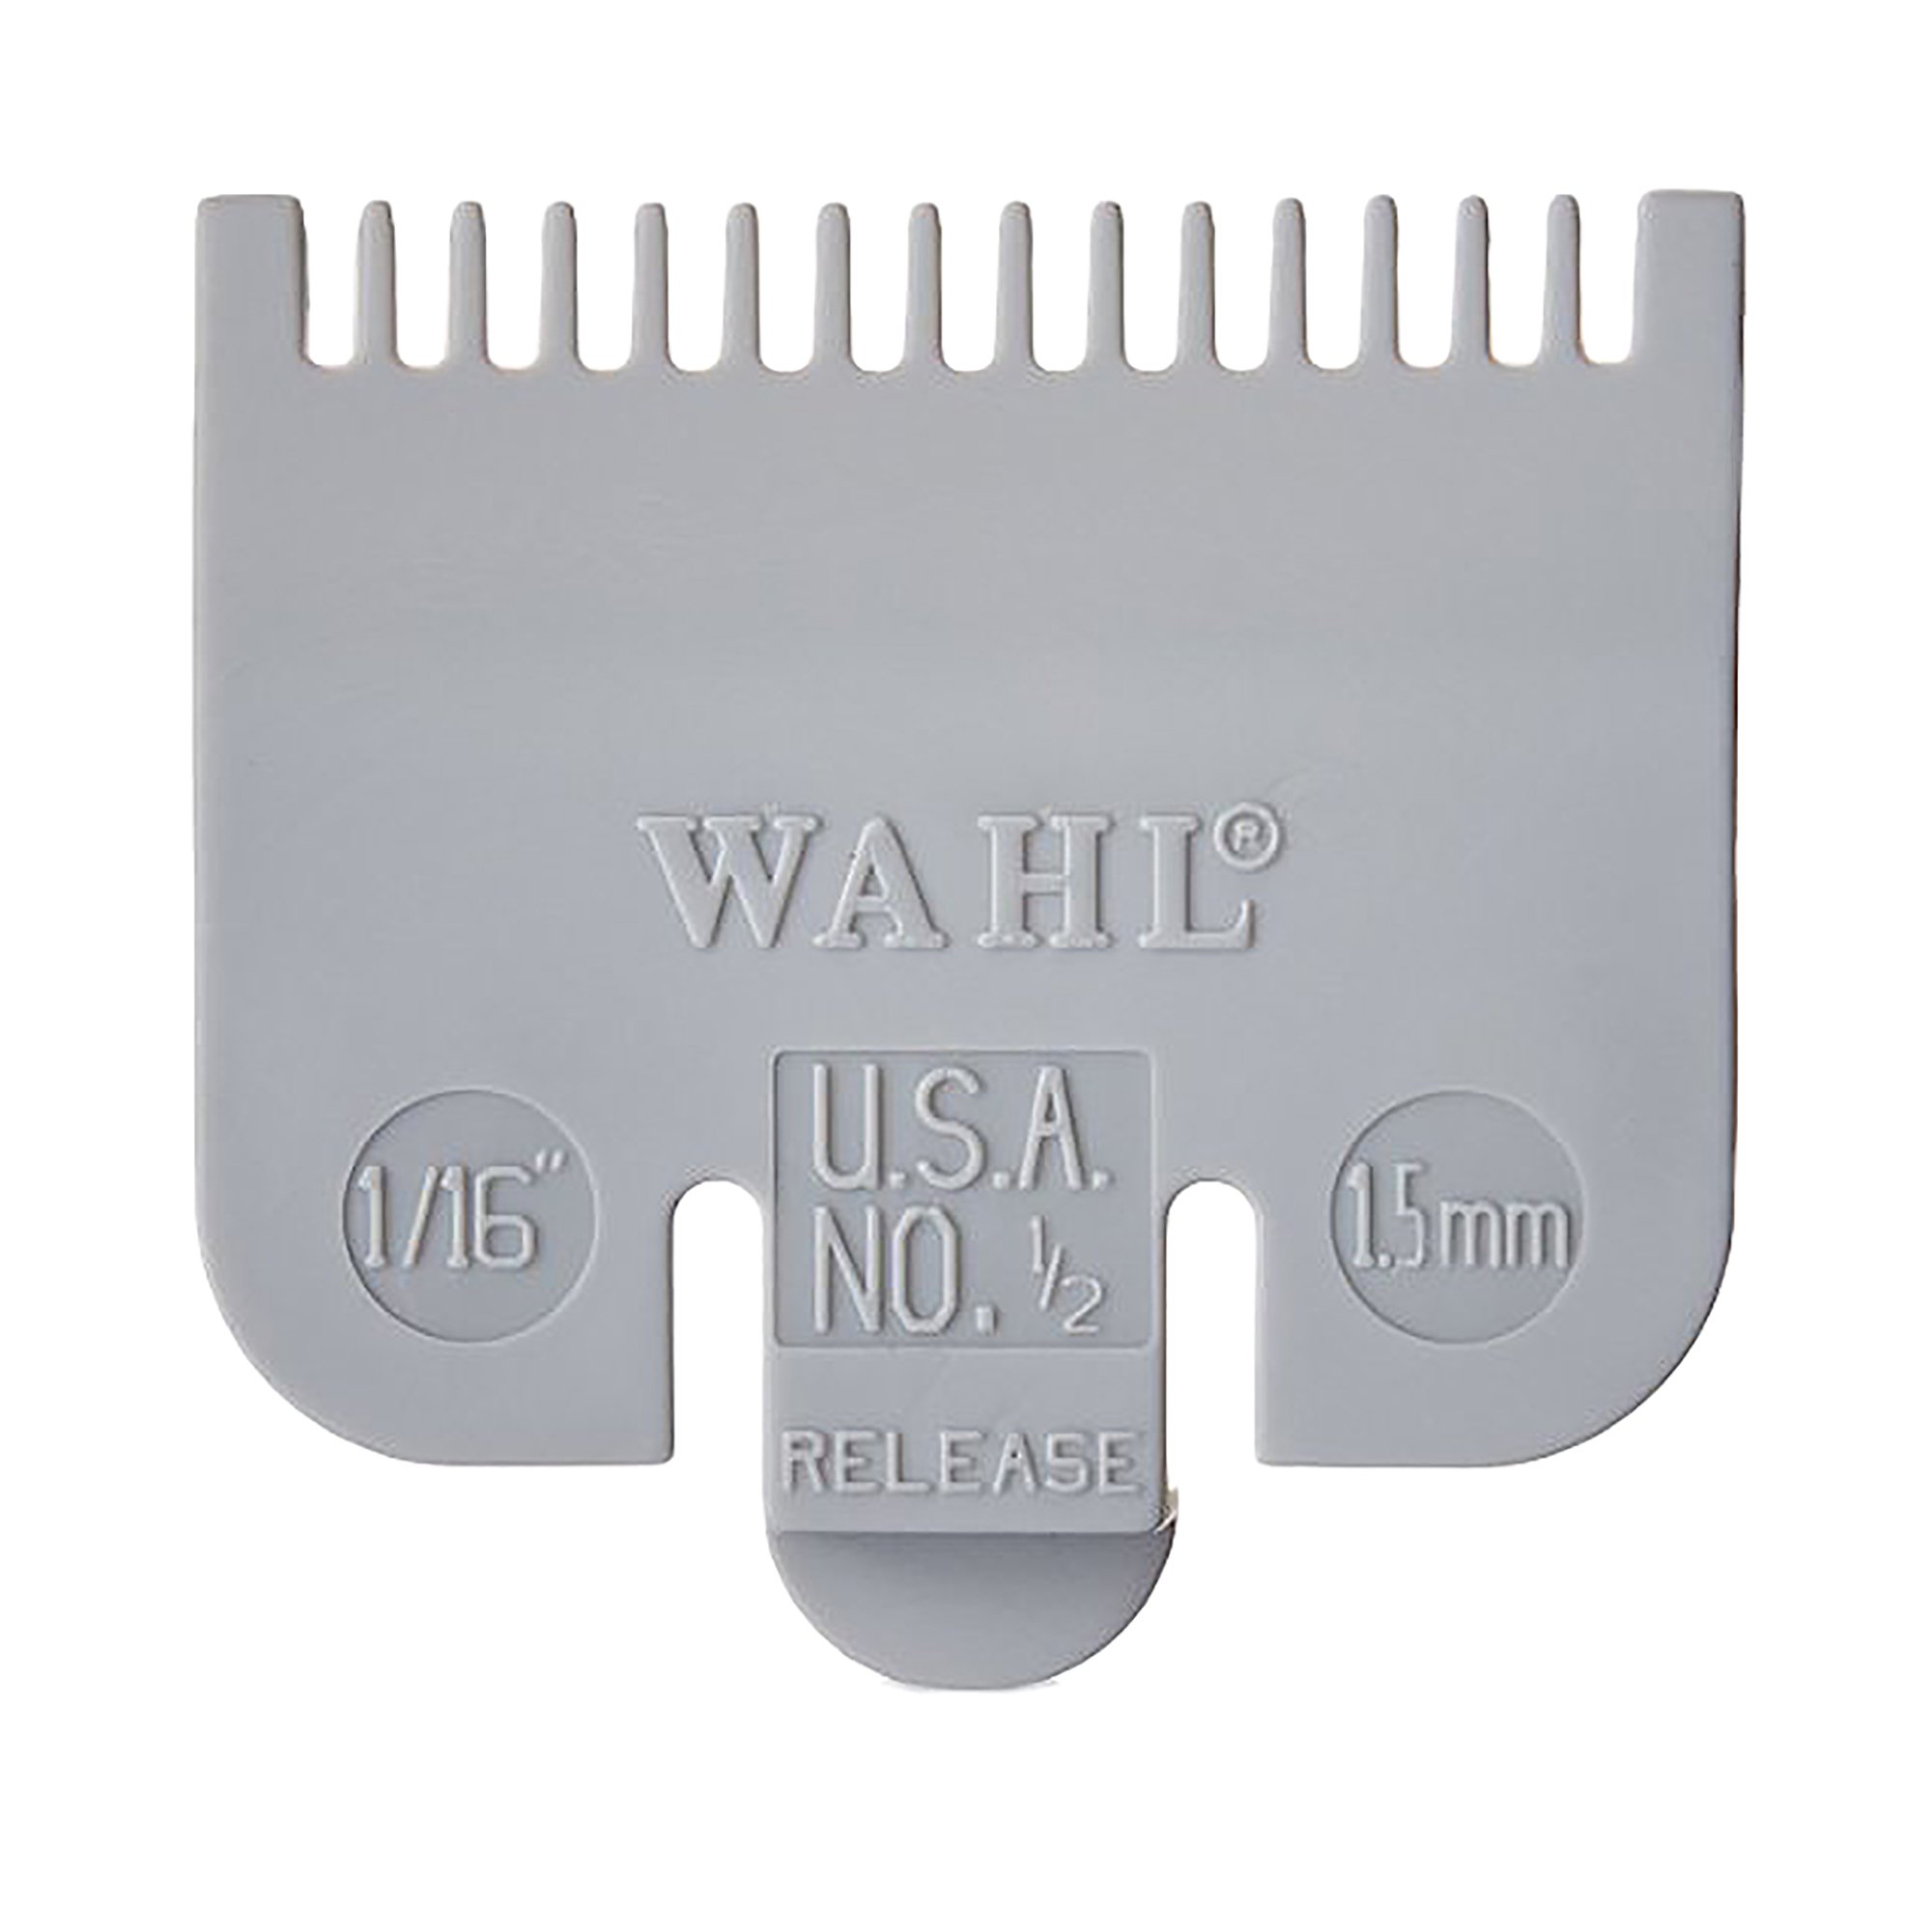 Wahl Professional Color Coded Comb Attachment #3137-101 - Grey #1/2 - 1/16